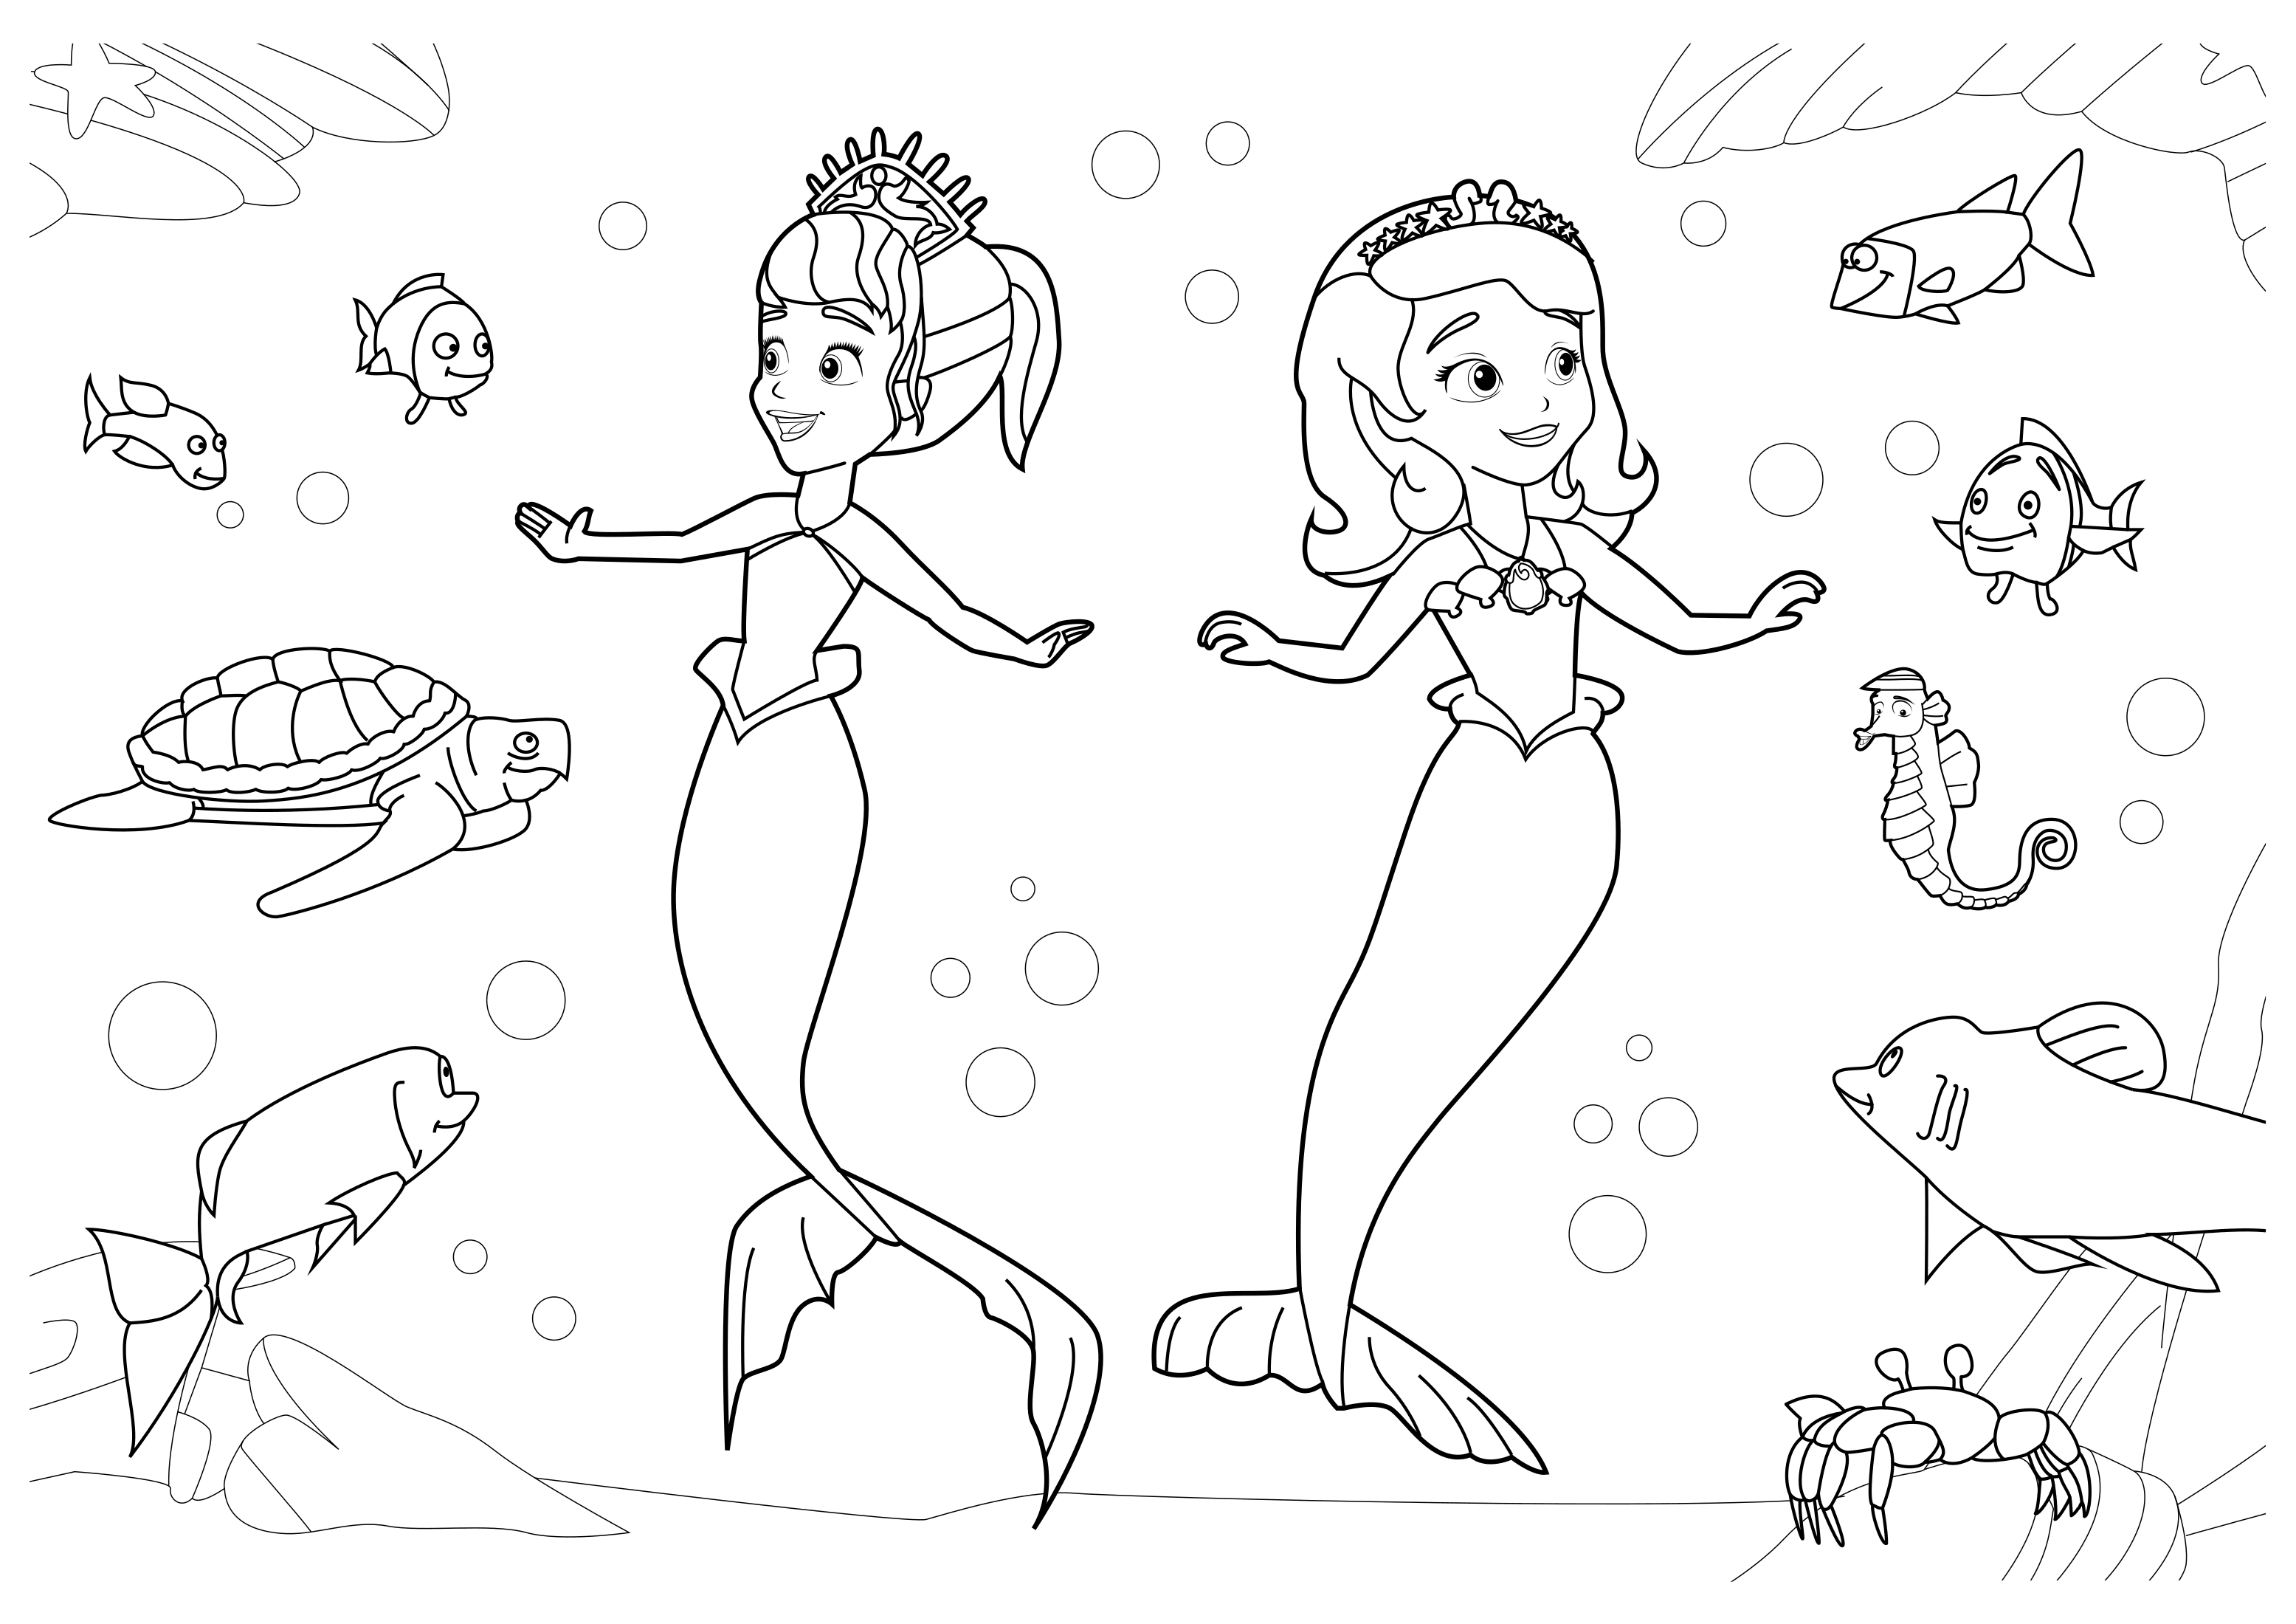 Coloring page Sofia the First The mermaids Sofia and Una